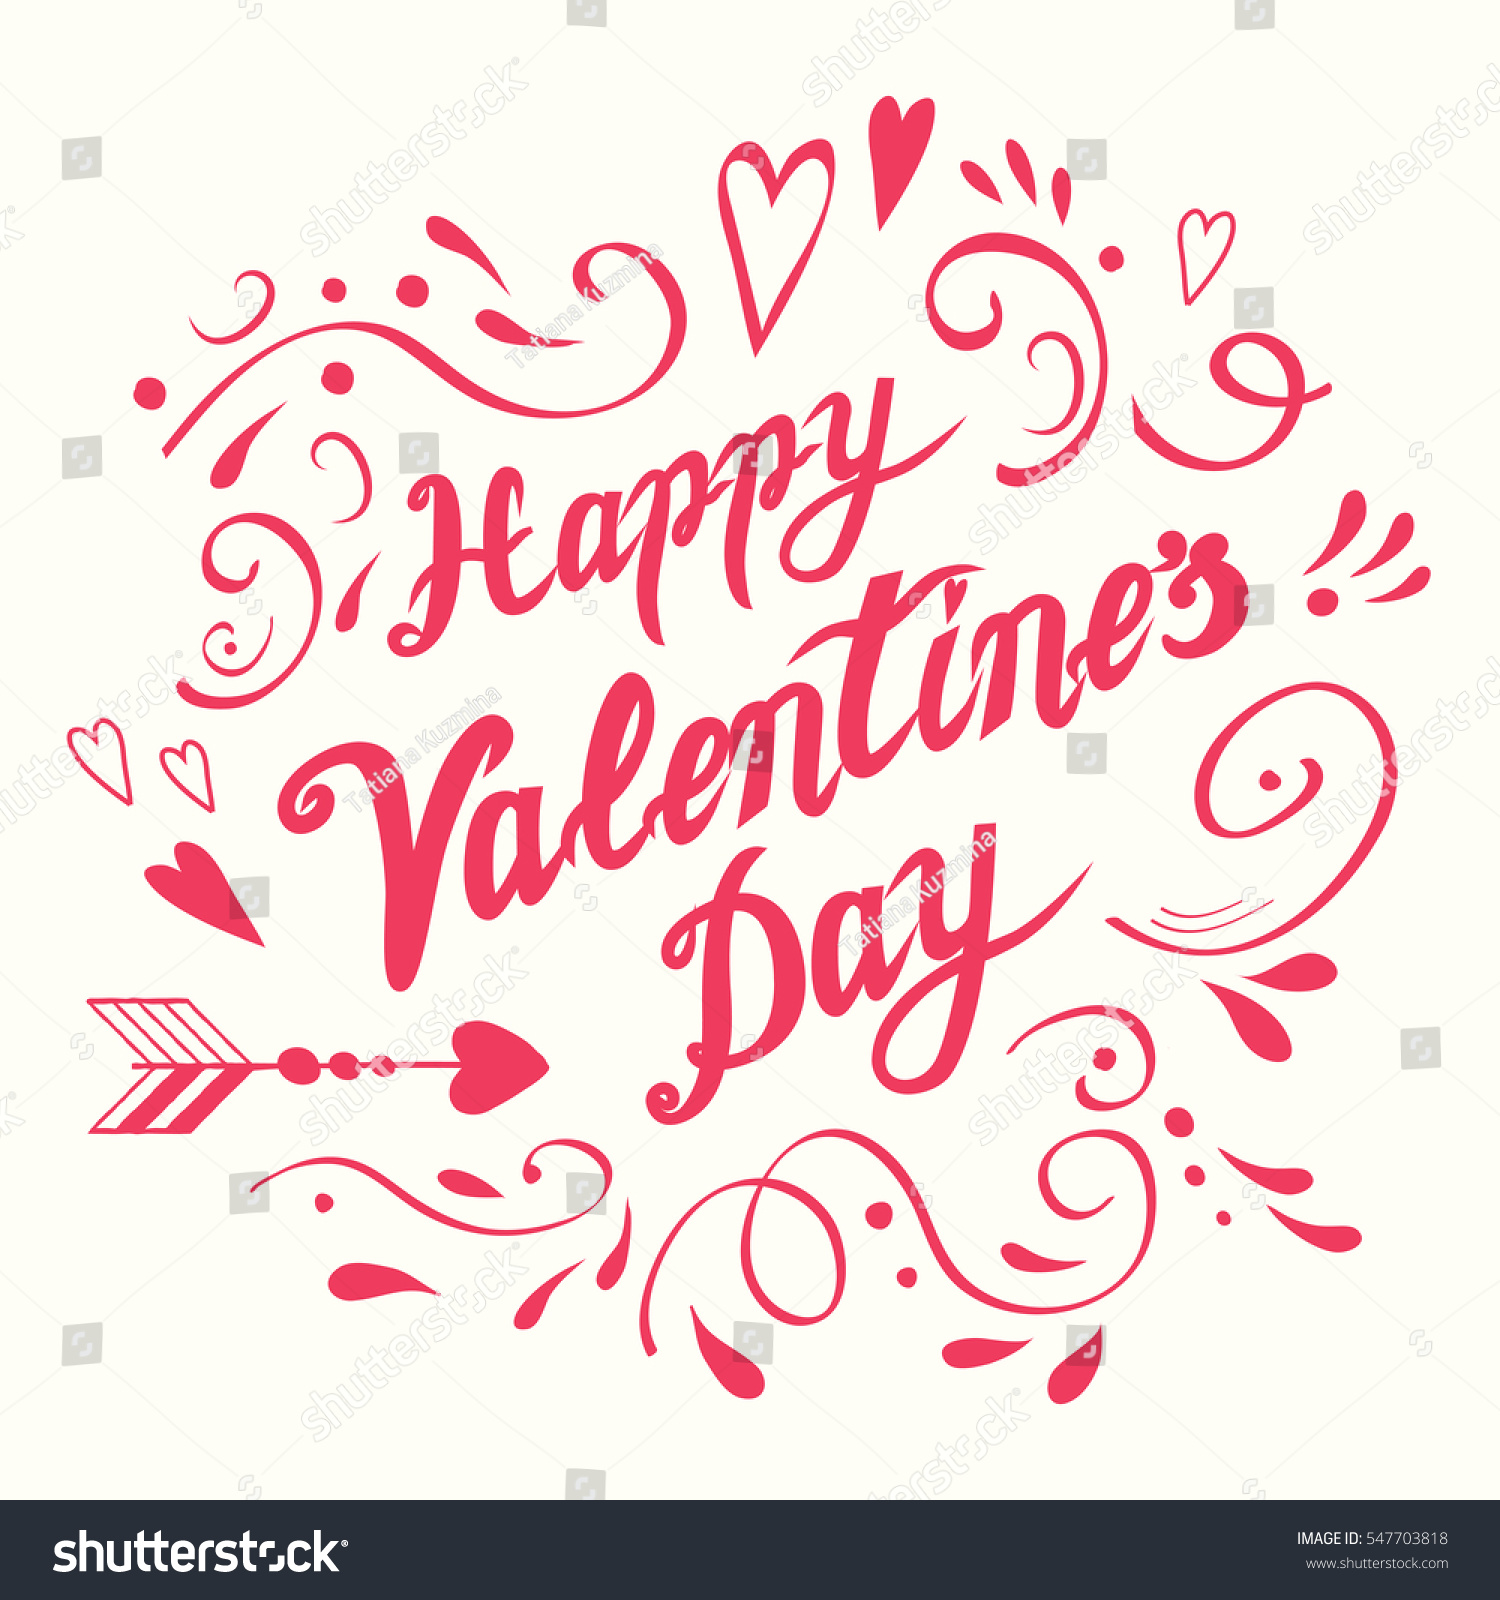 Cute Handwritten Romantic Happy Valentines Day Stock Vector Royalty Free 547703818 Now, if you guys are looking. https www shutterstock com image vector cute handwritten romantic happy valentines day 547703818